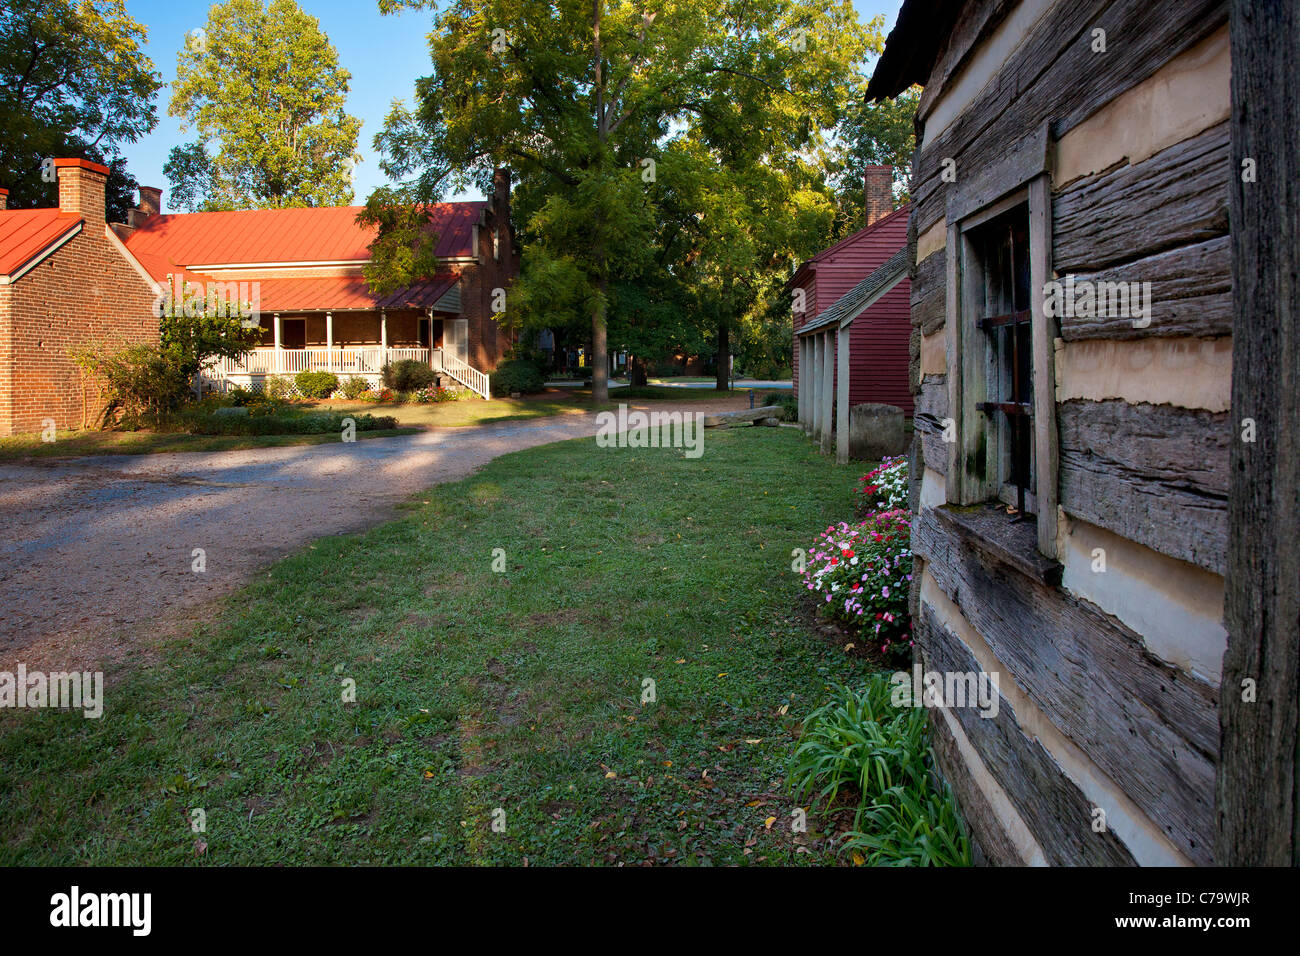 The Carter House - site of the bloody Civil War Battle of Franklin (Nov 30, 1864), Tennessee USA Stock Photo